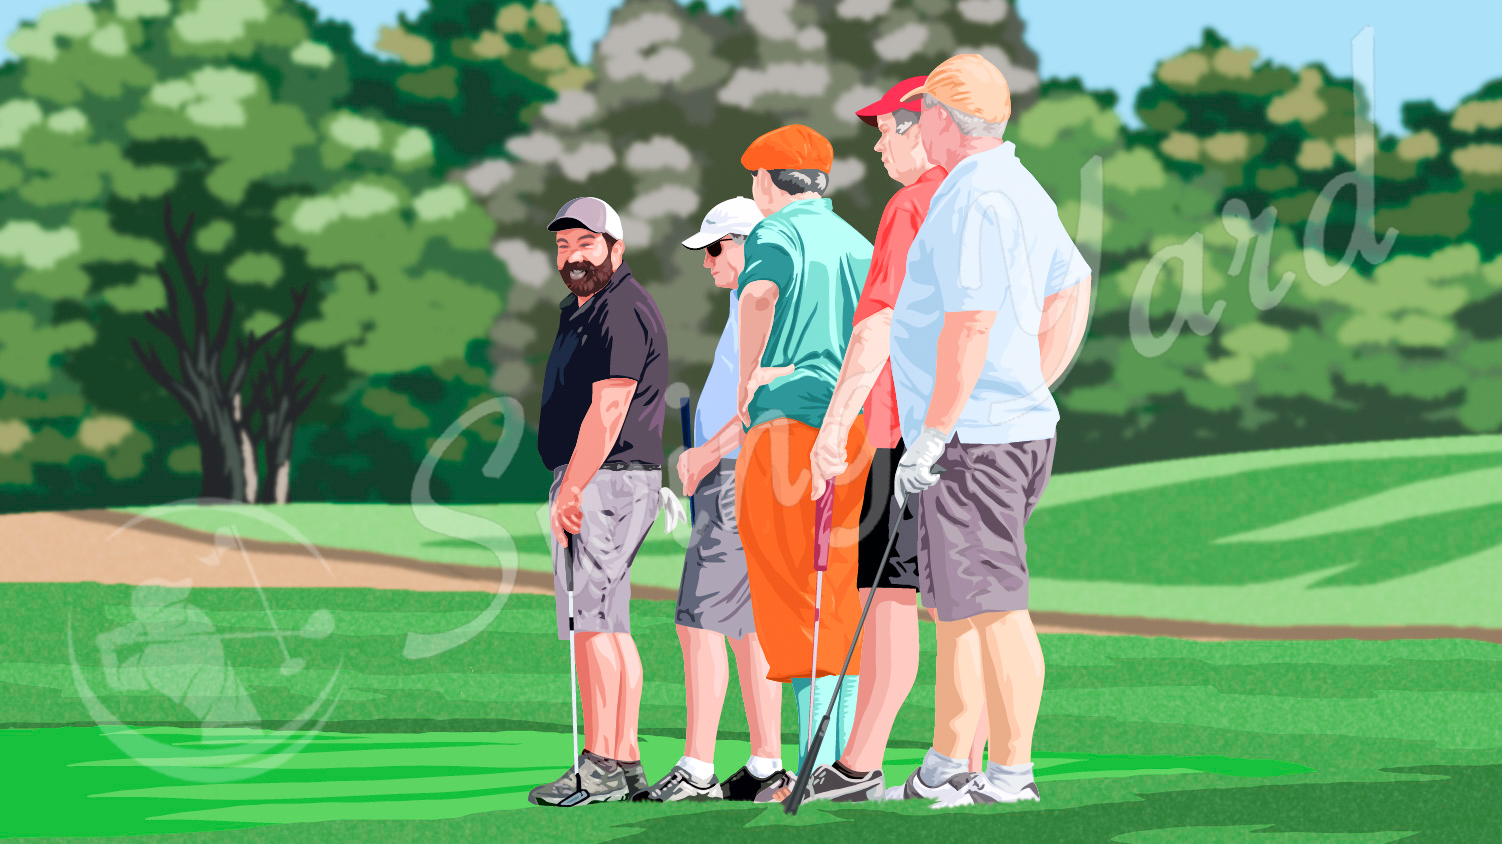 Guys having a good time with friends on the golf course